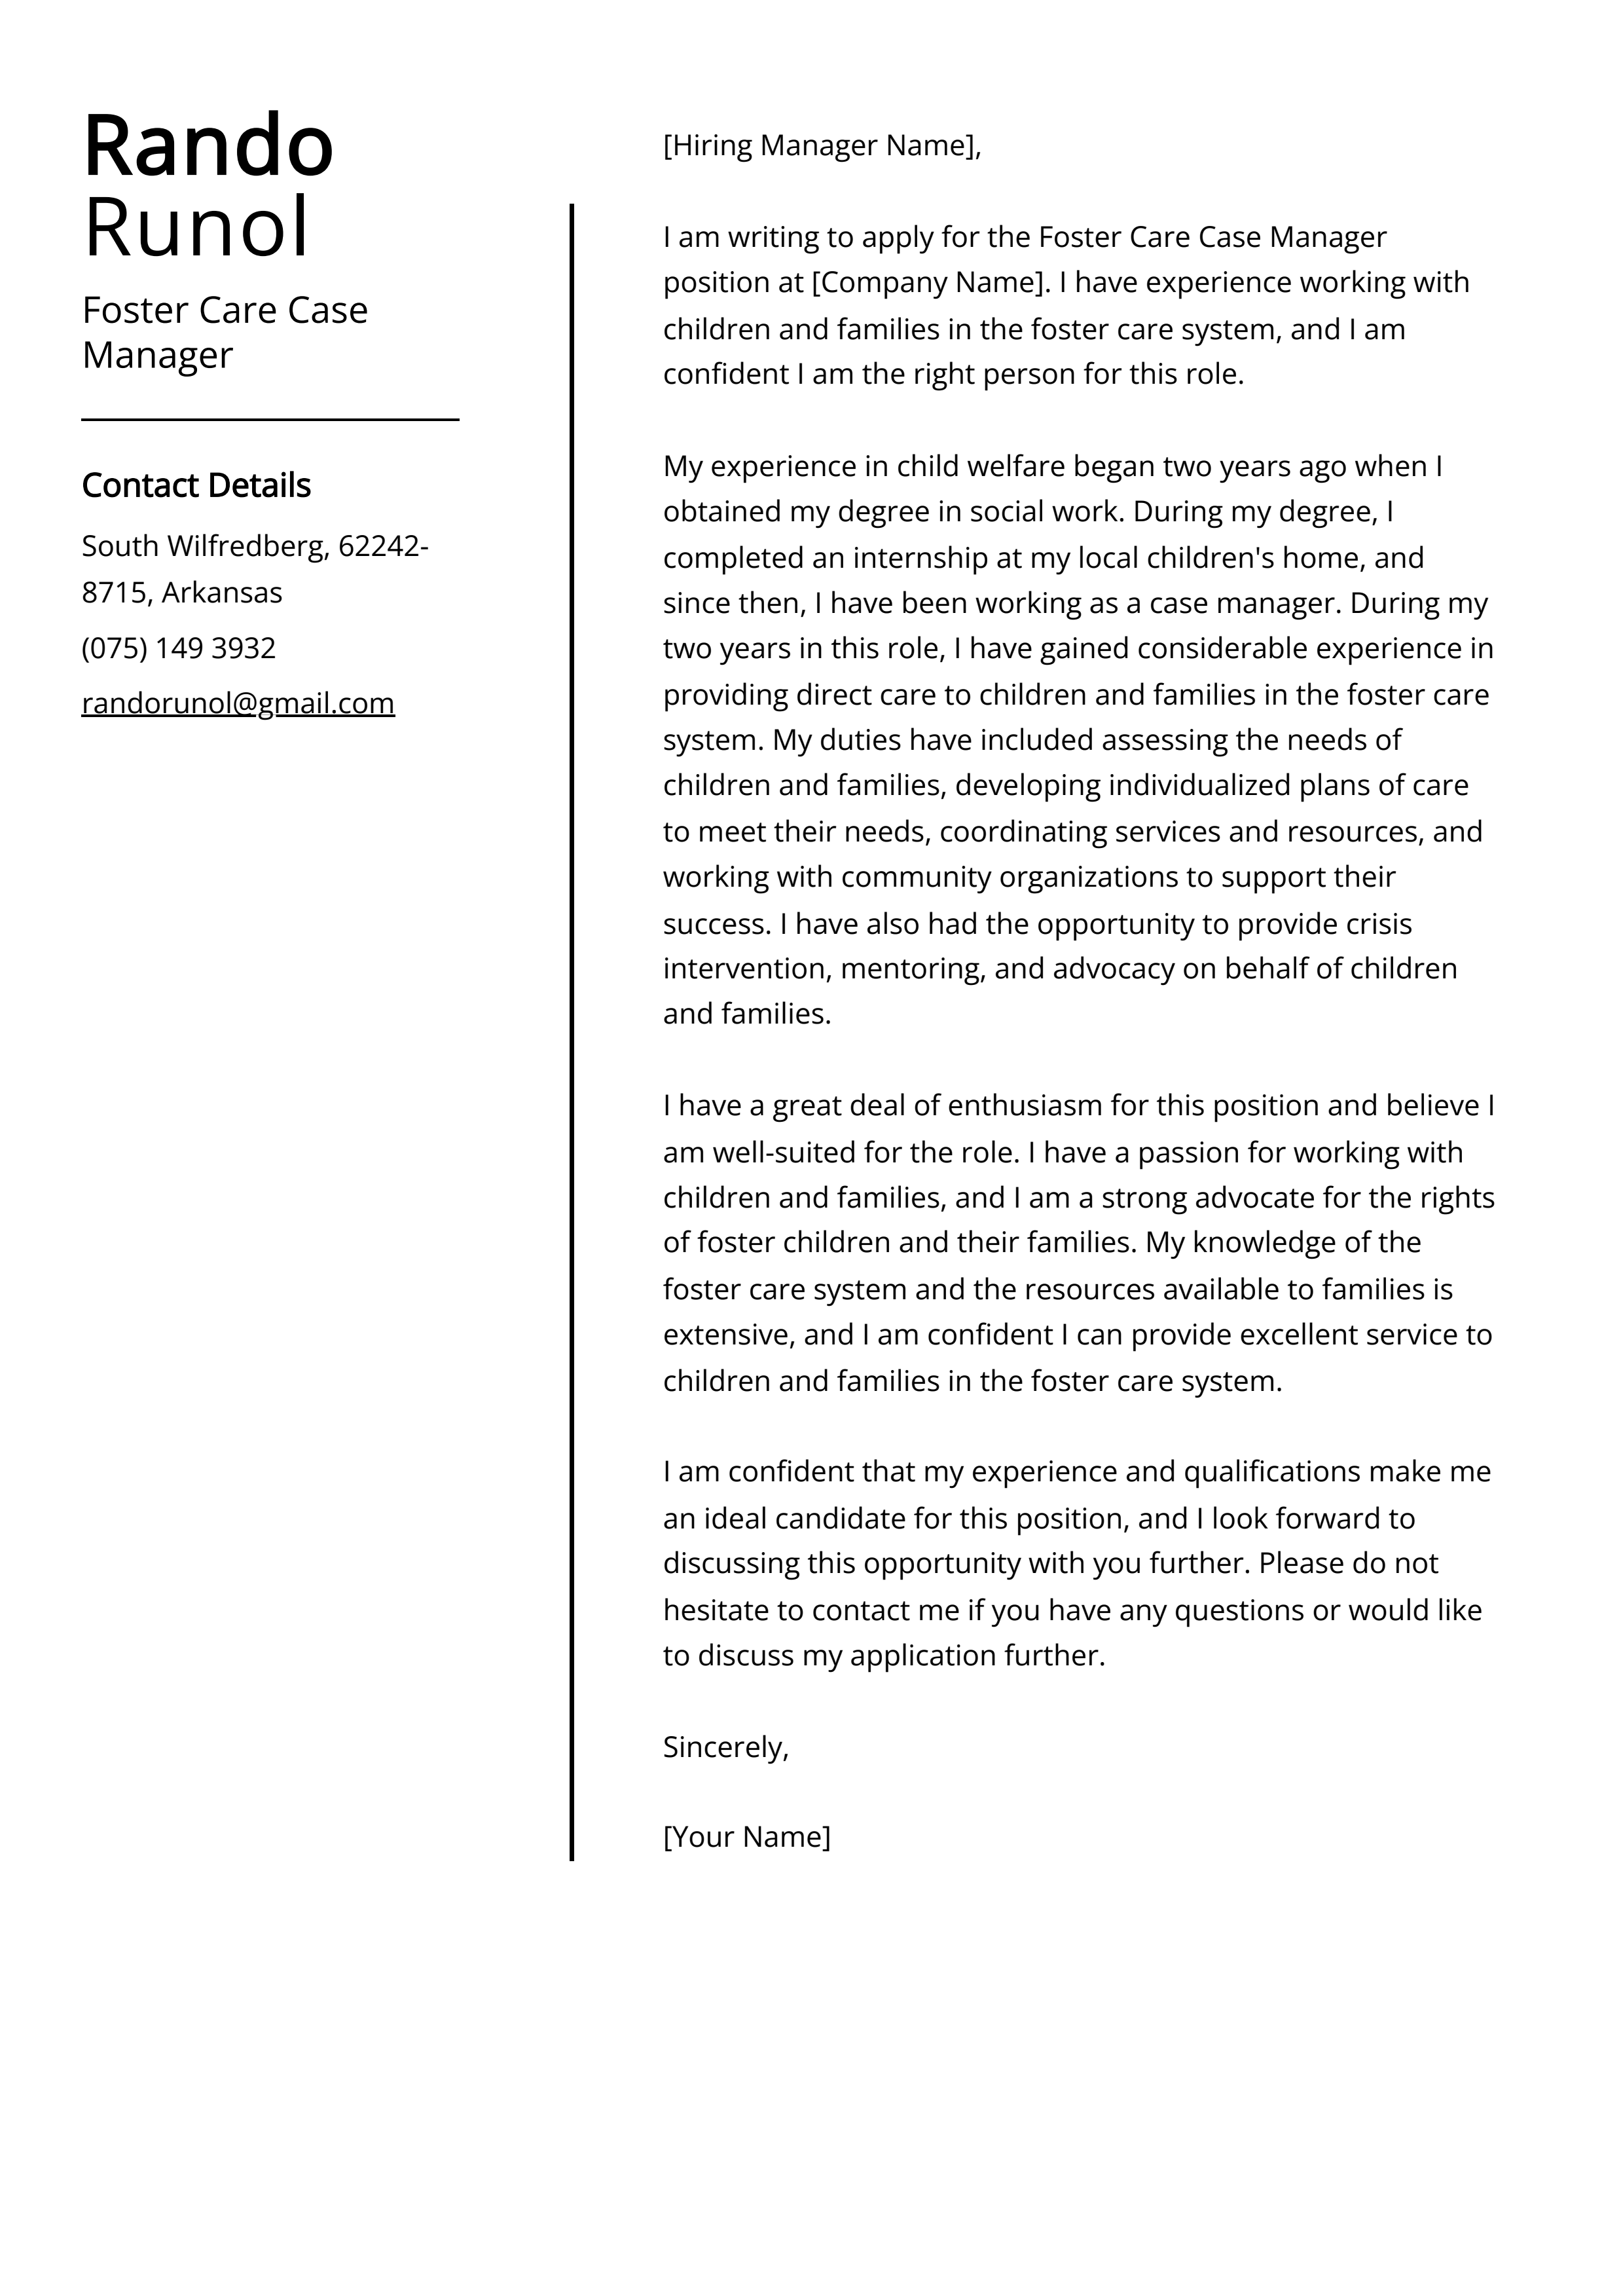 Foster Care Case Manager Cover Letter Example